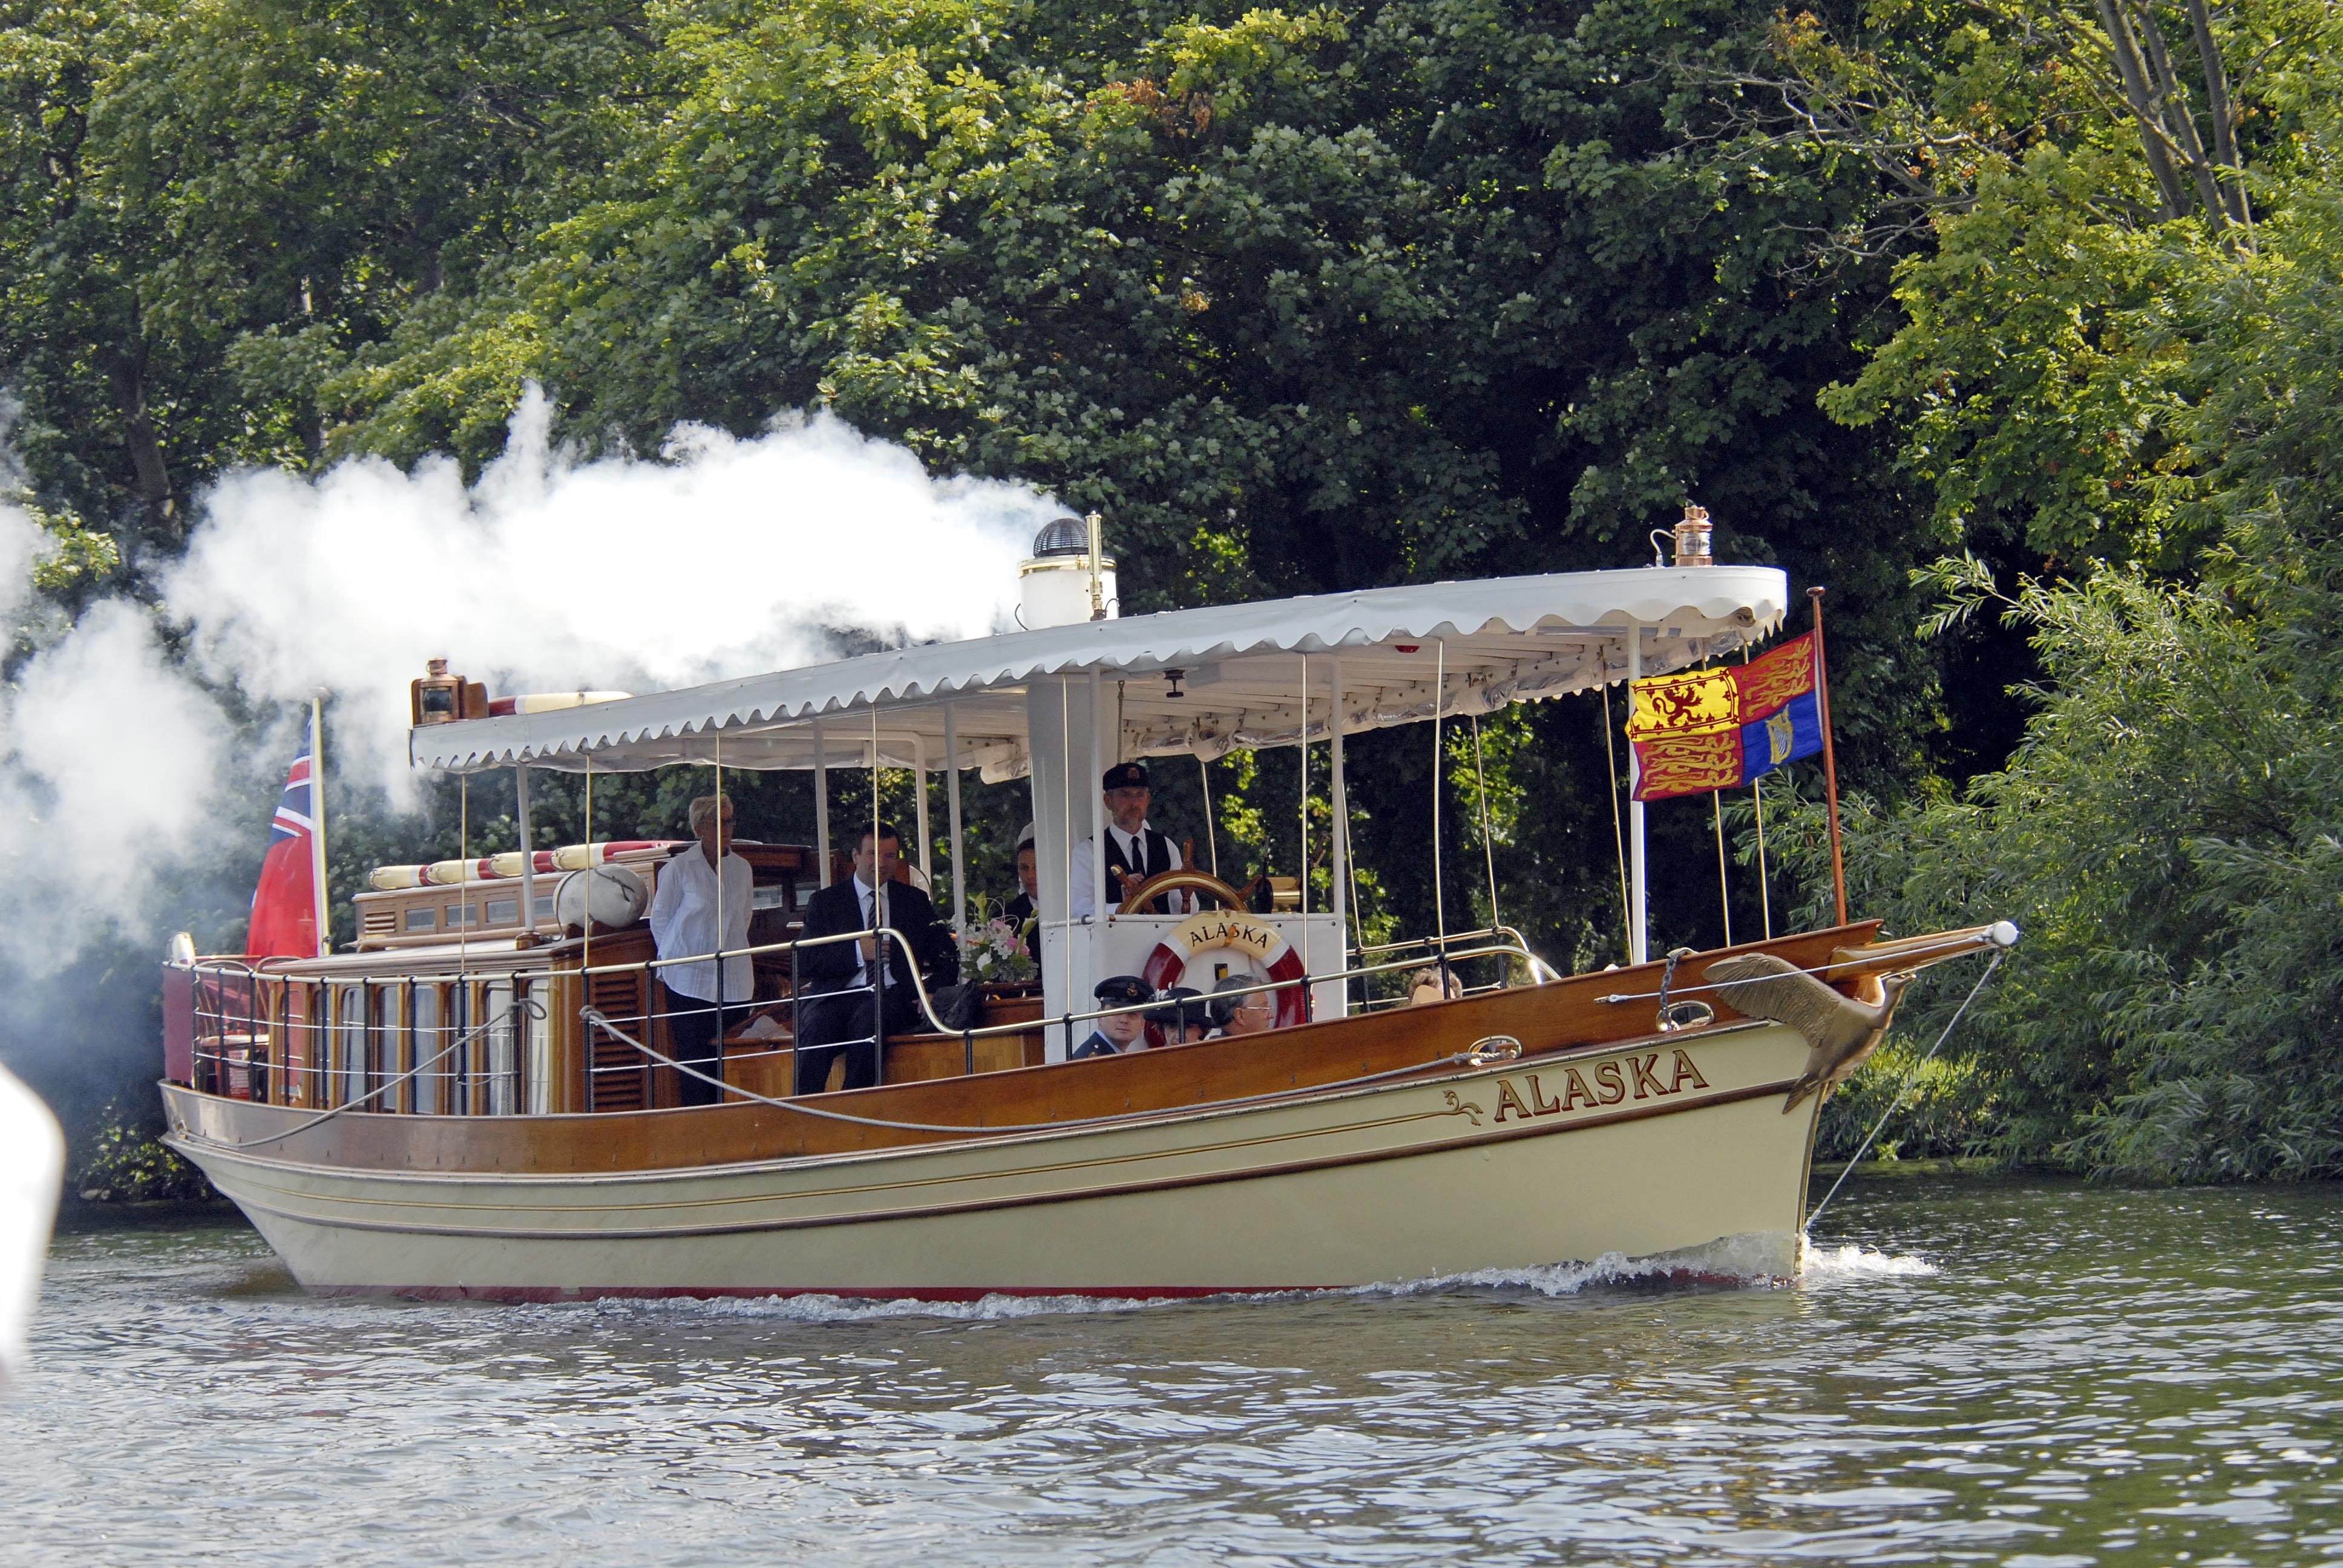 The steam powered boat фото 87